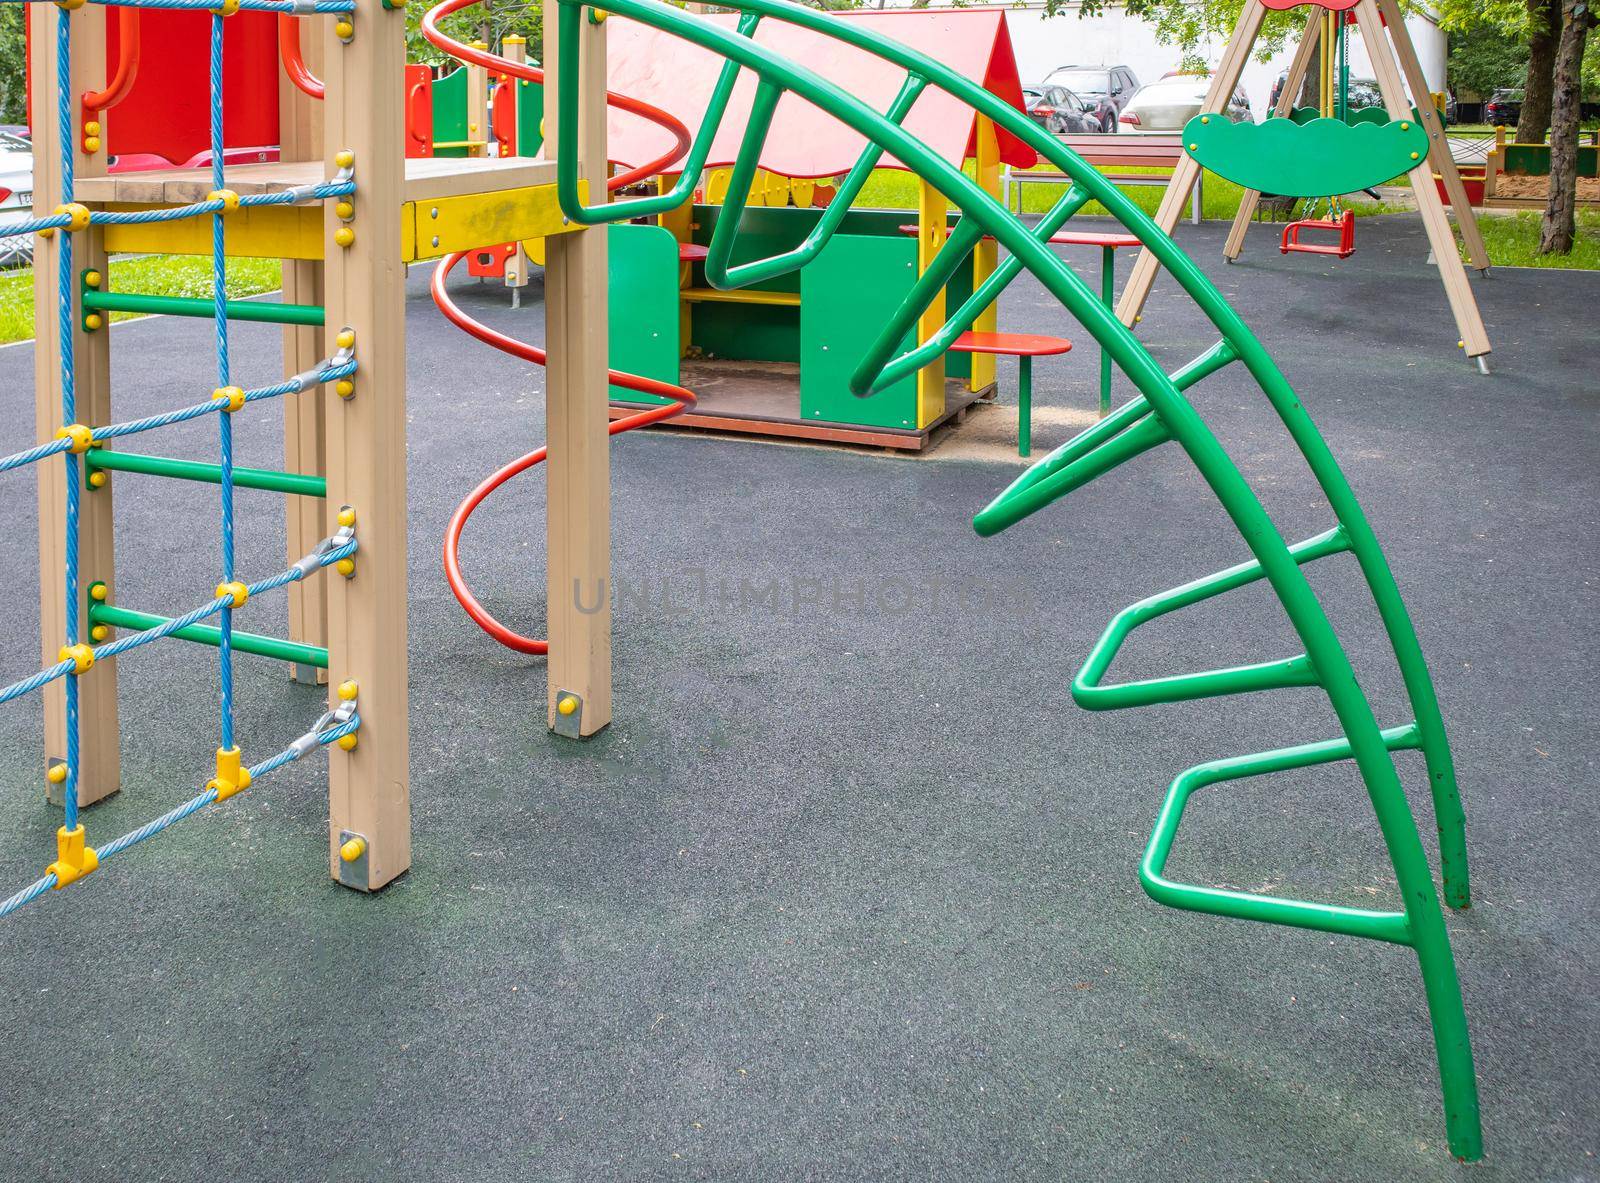 Modern Children's Outdoor Sports Play Complex with Slide, Rope Wall.